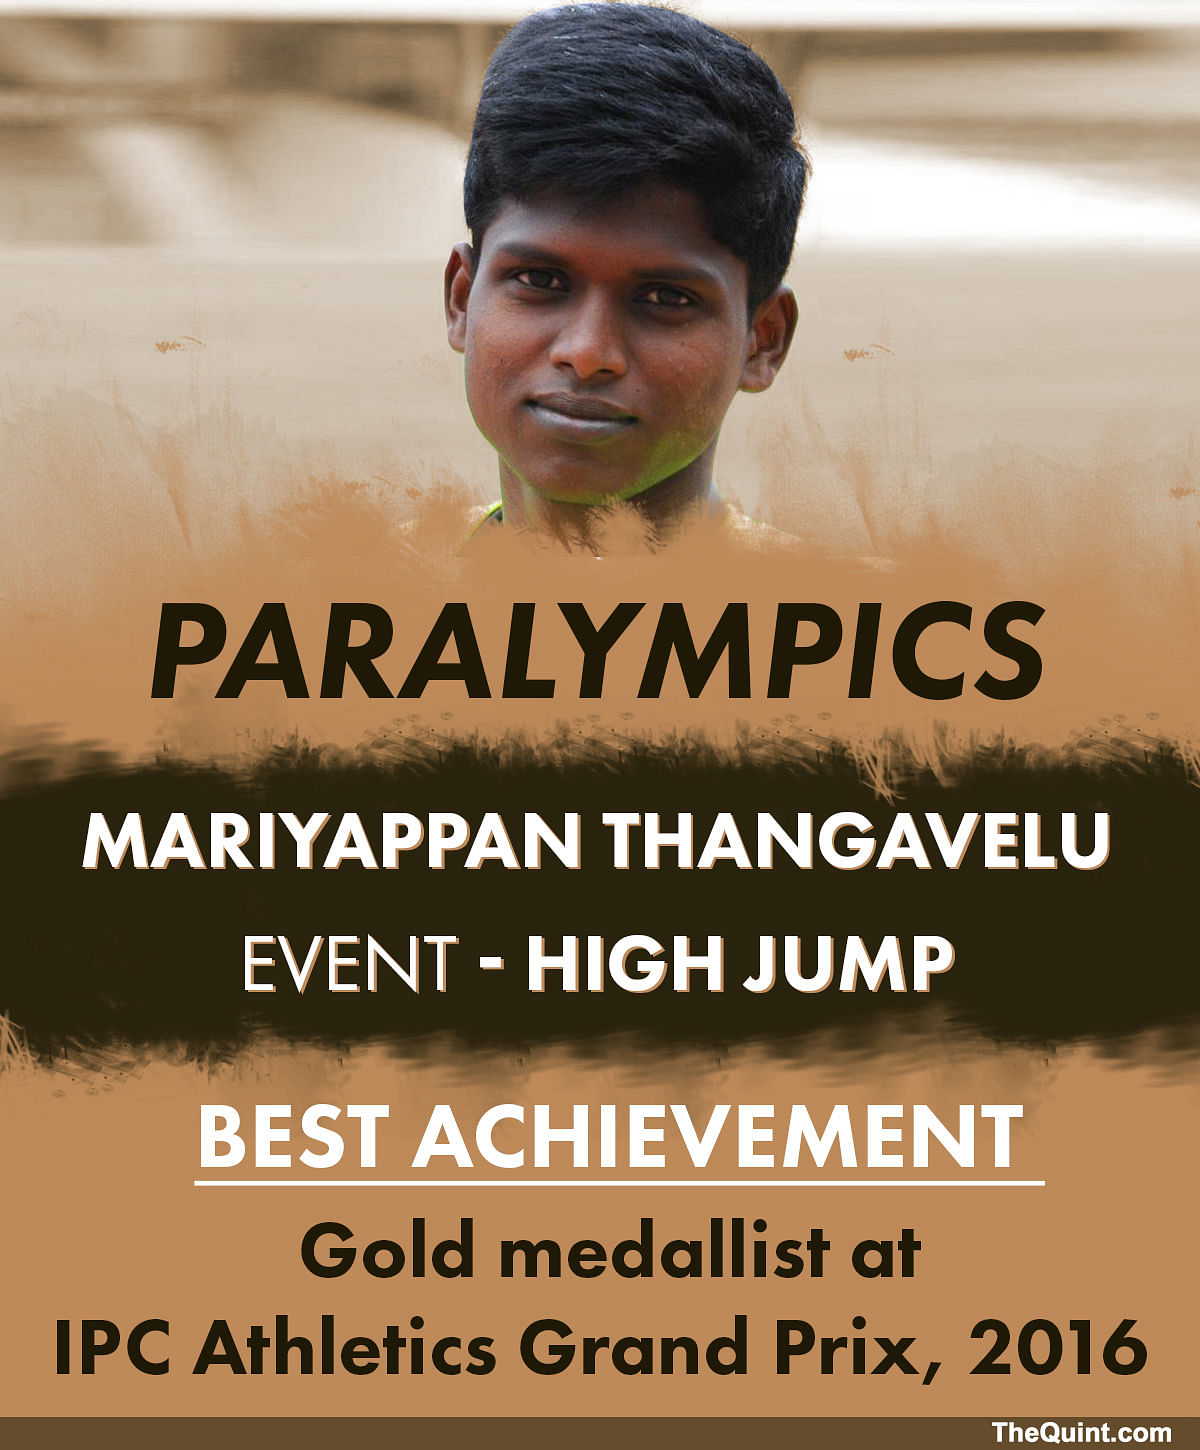 The Quint takes a look at the medal hopes for the Summer Paralympics, which begins on 7 September.